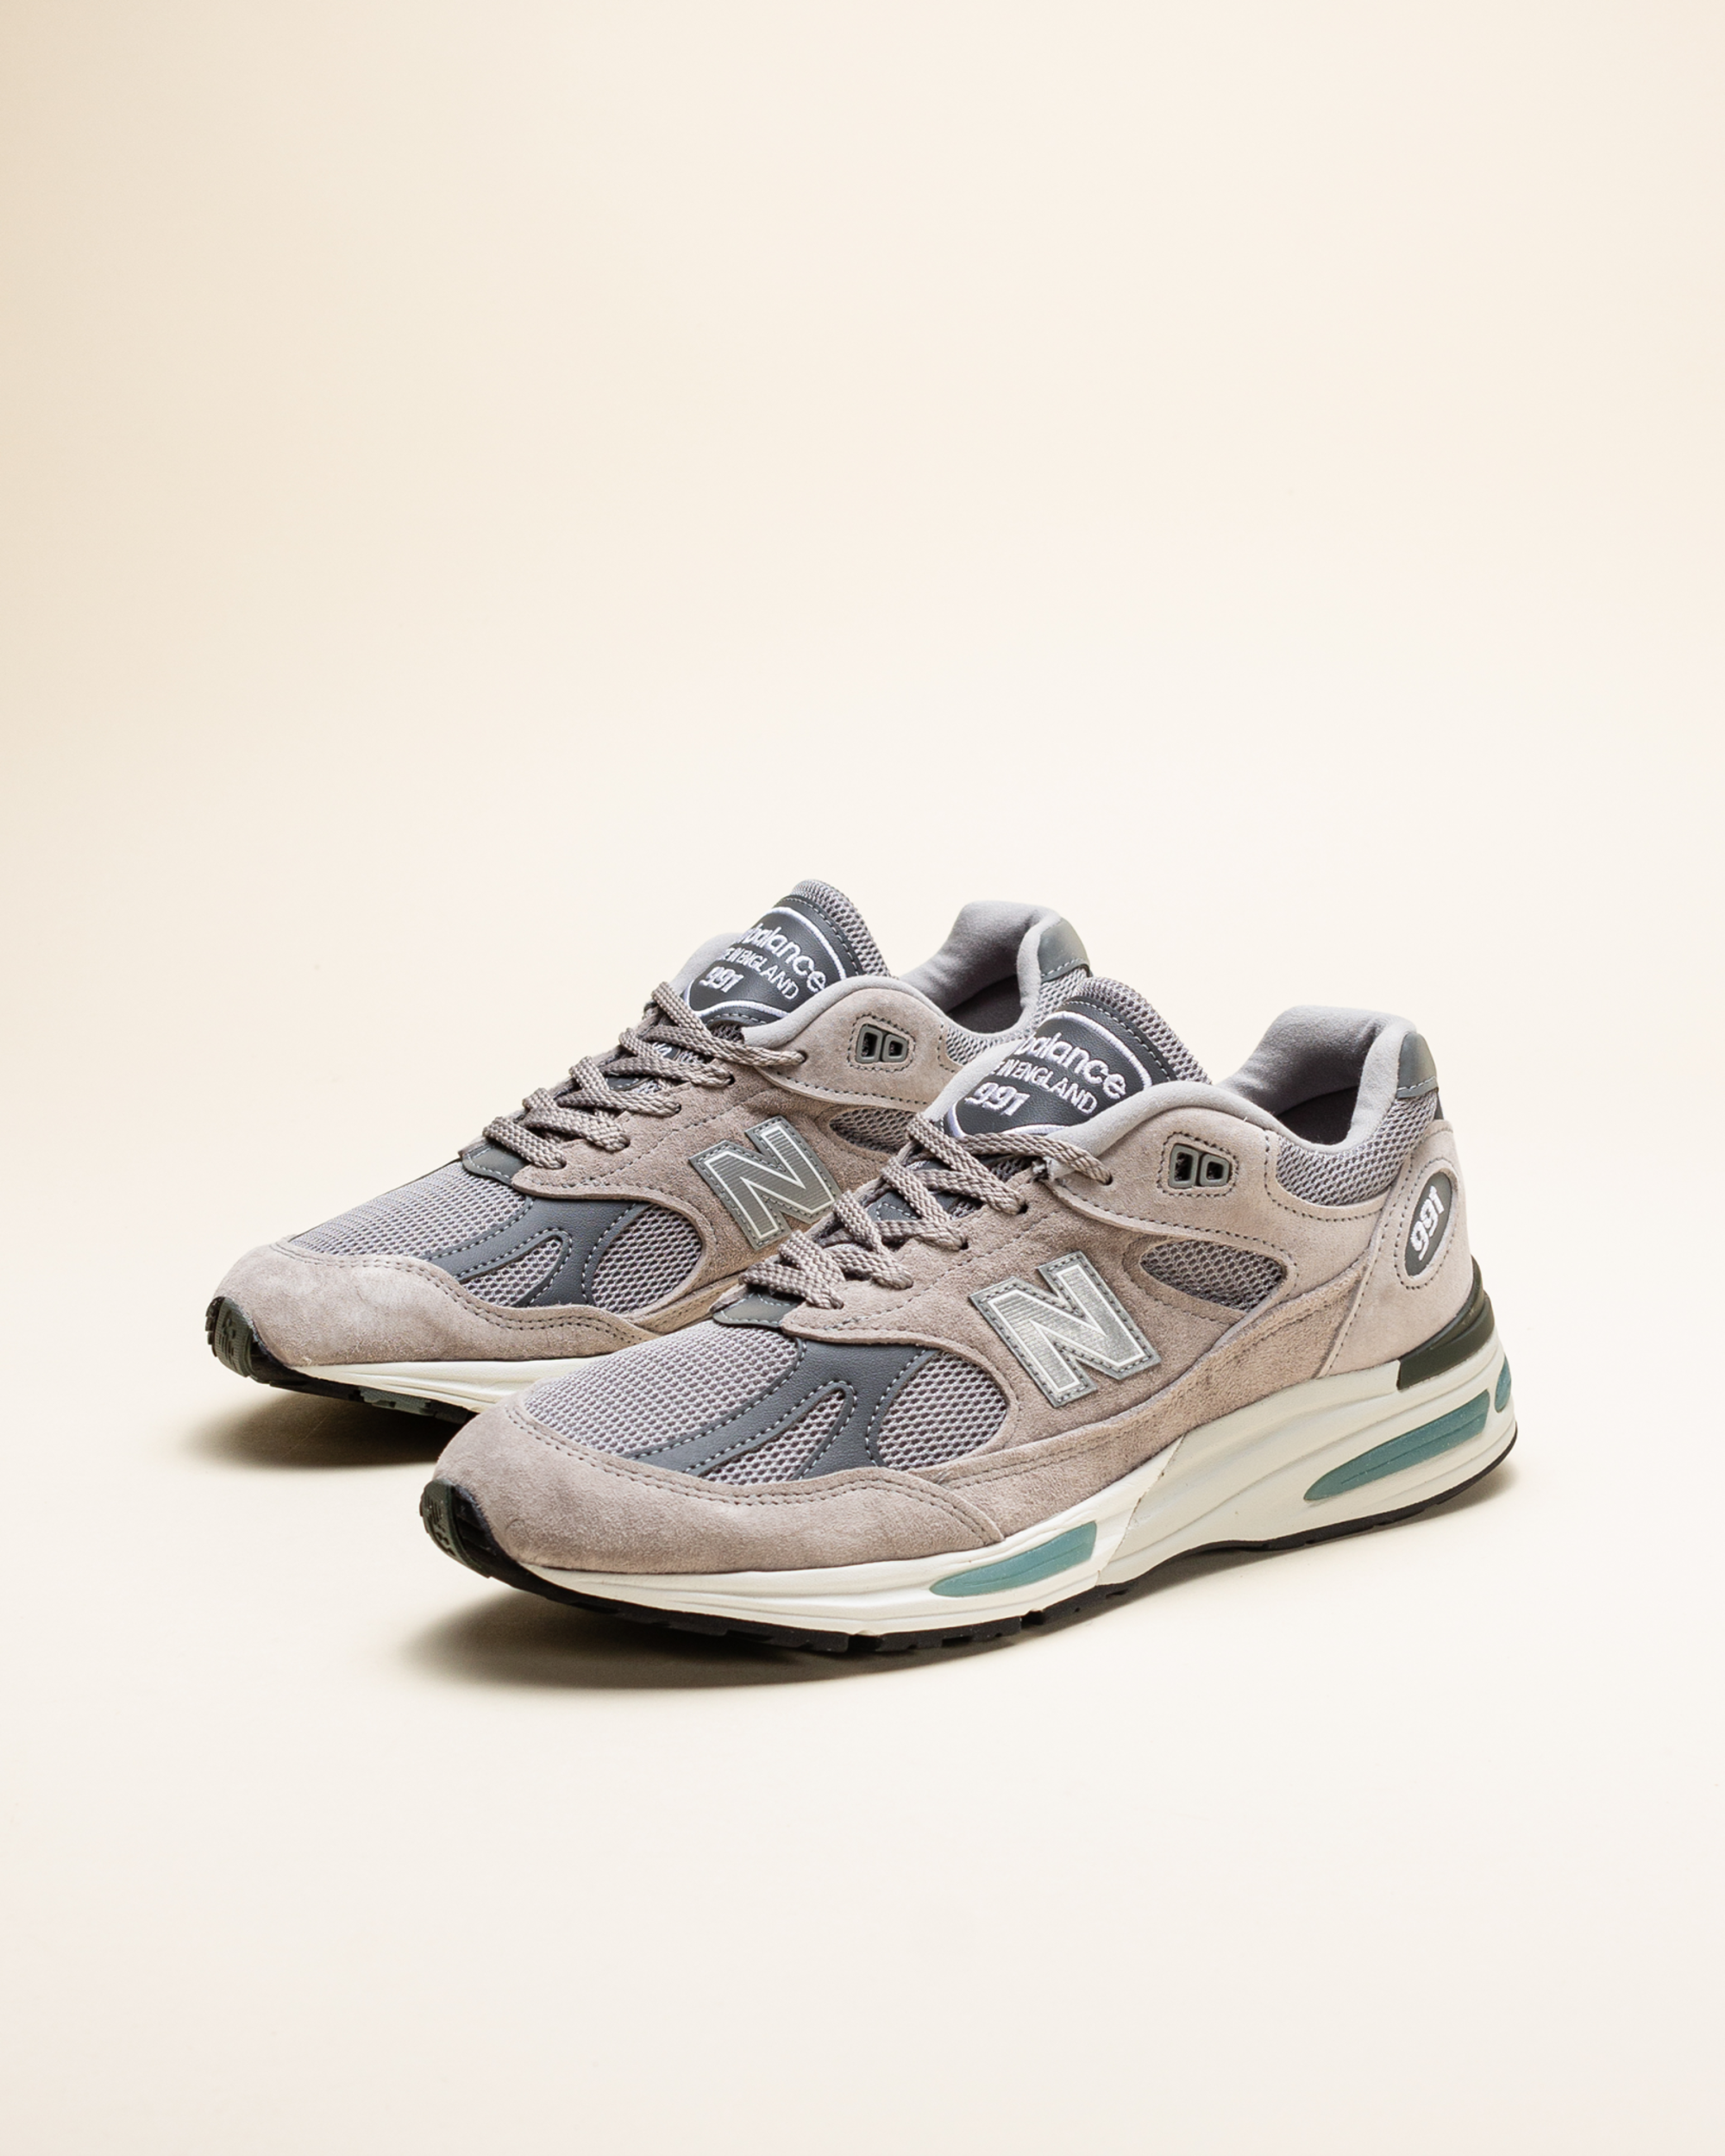 New Balance Made in UK 991v2 - Dove/Alloy/Silver